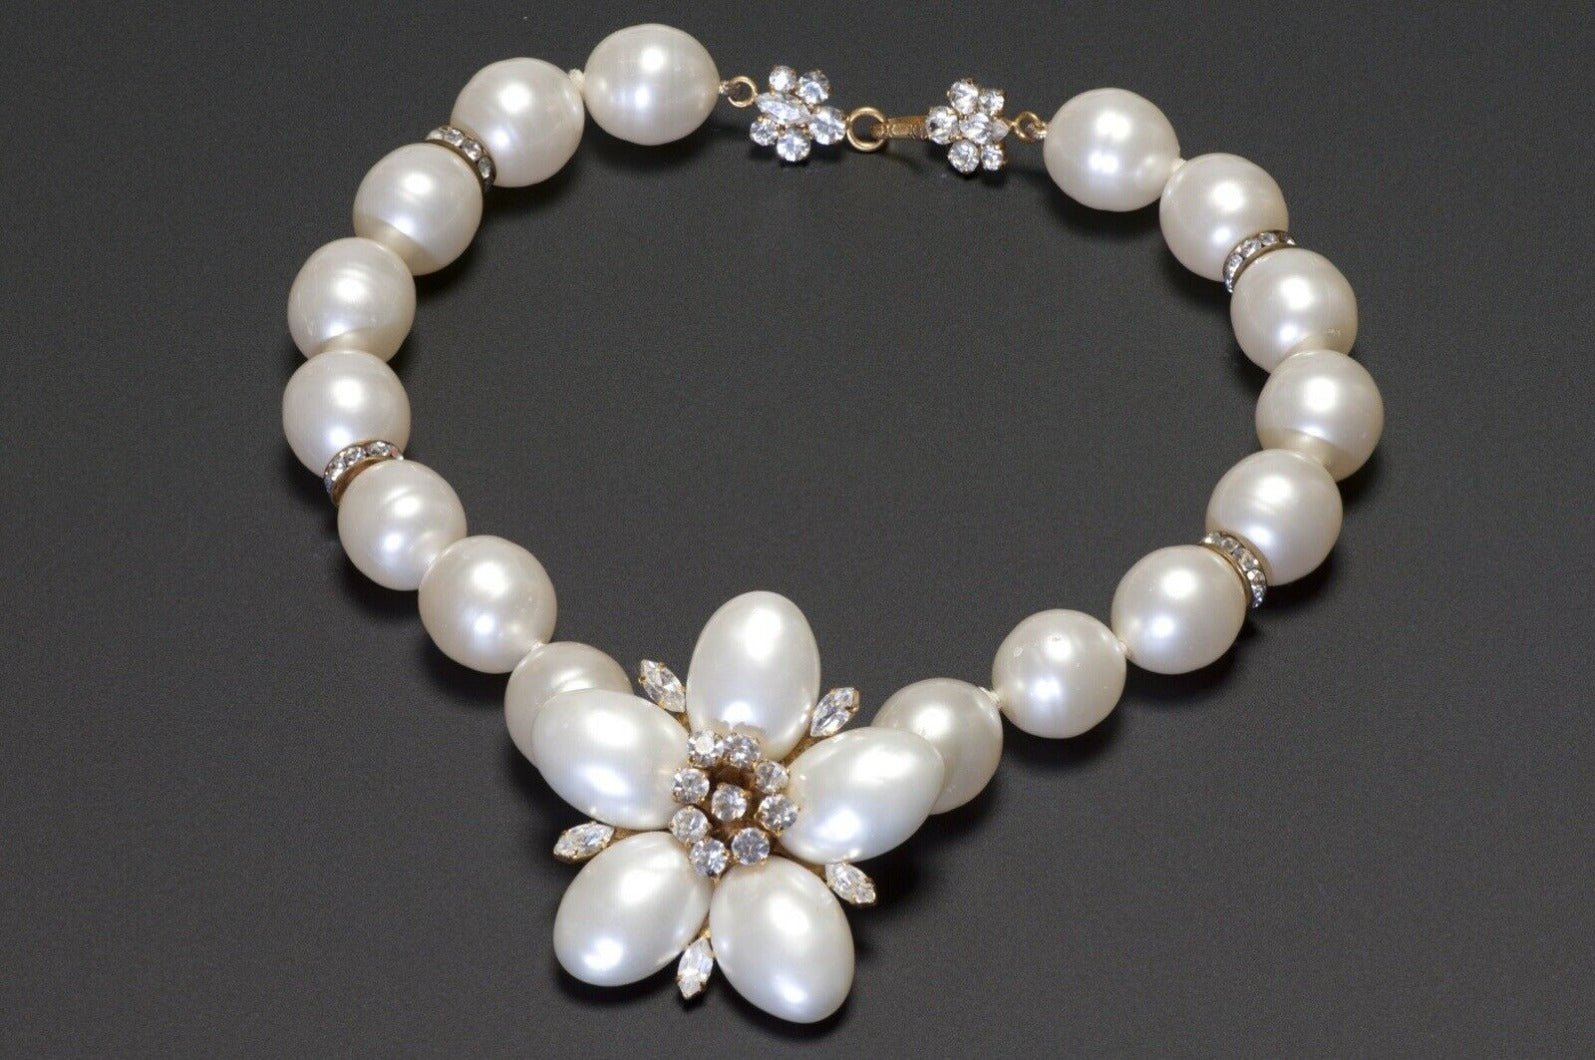 CHANEL Paris 1990’s Faux Pearl Glass Crystal Camellia Necklace